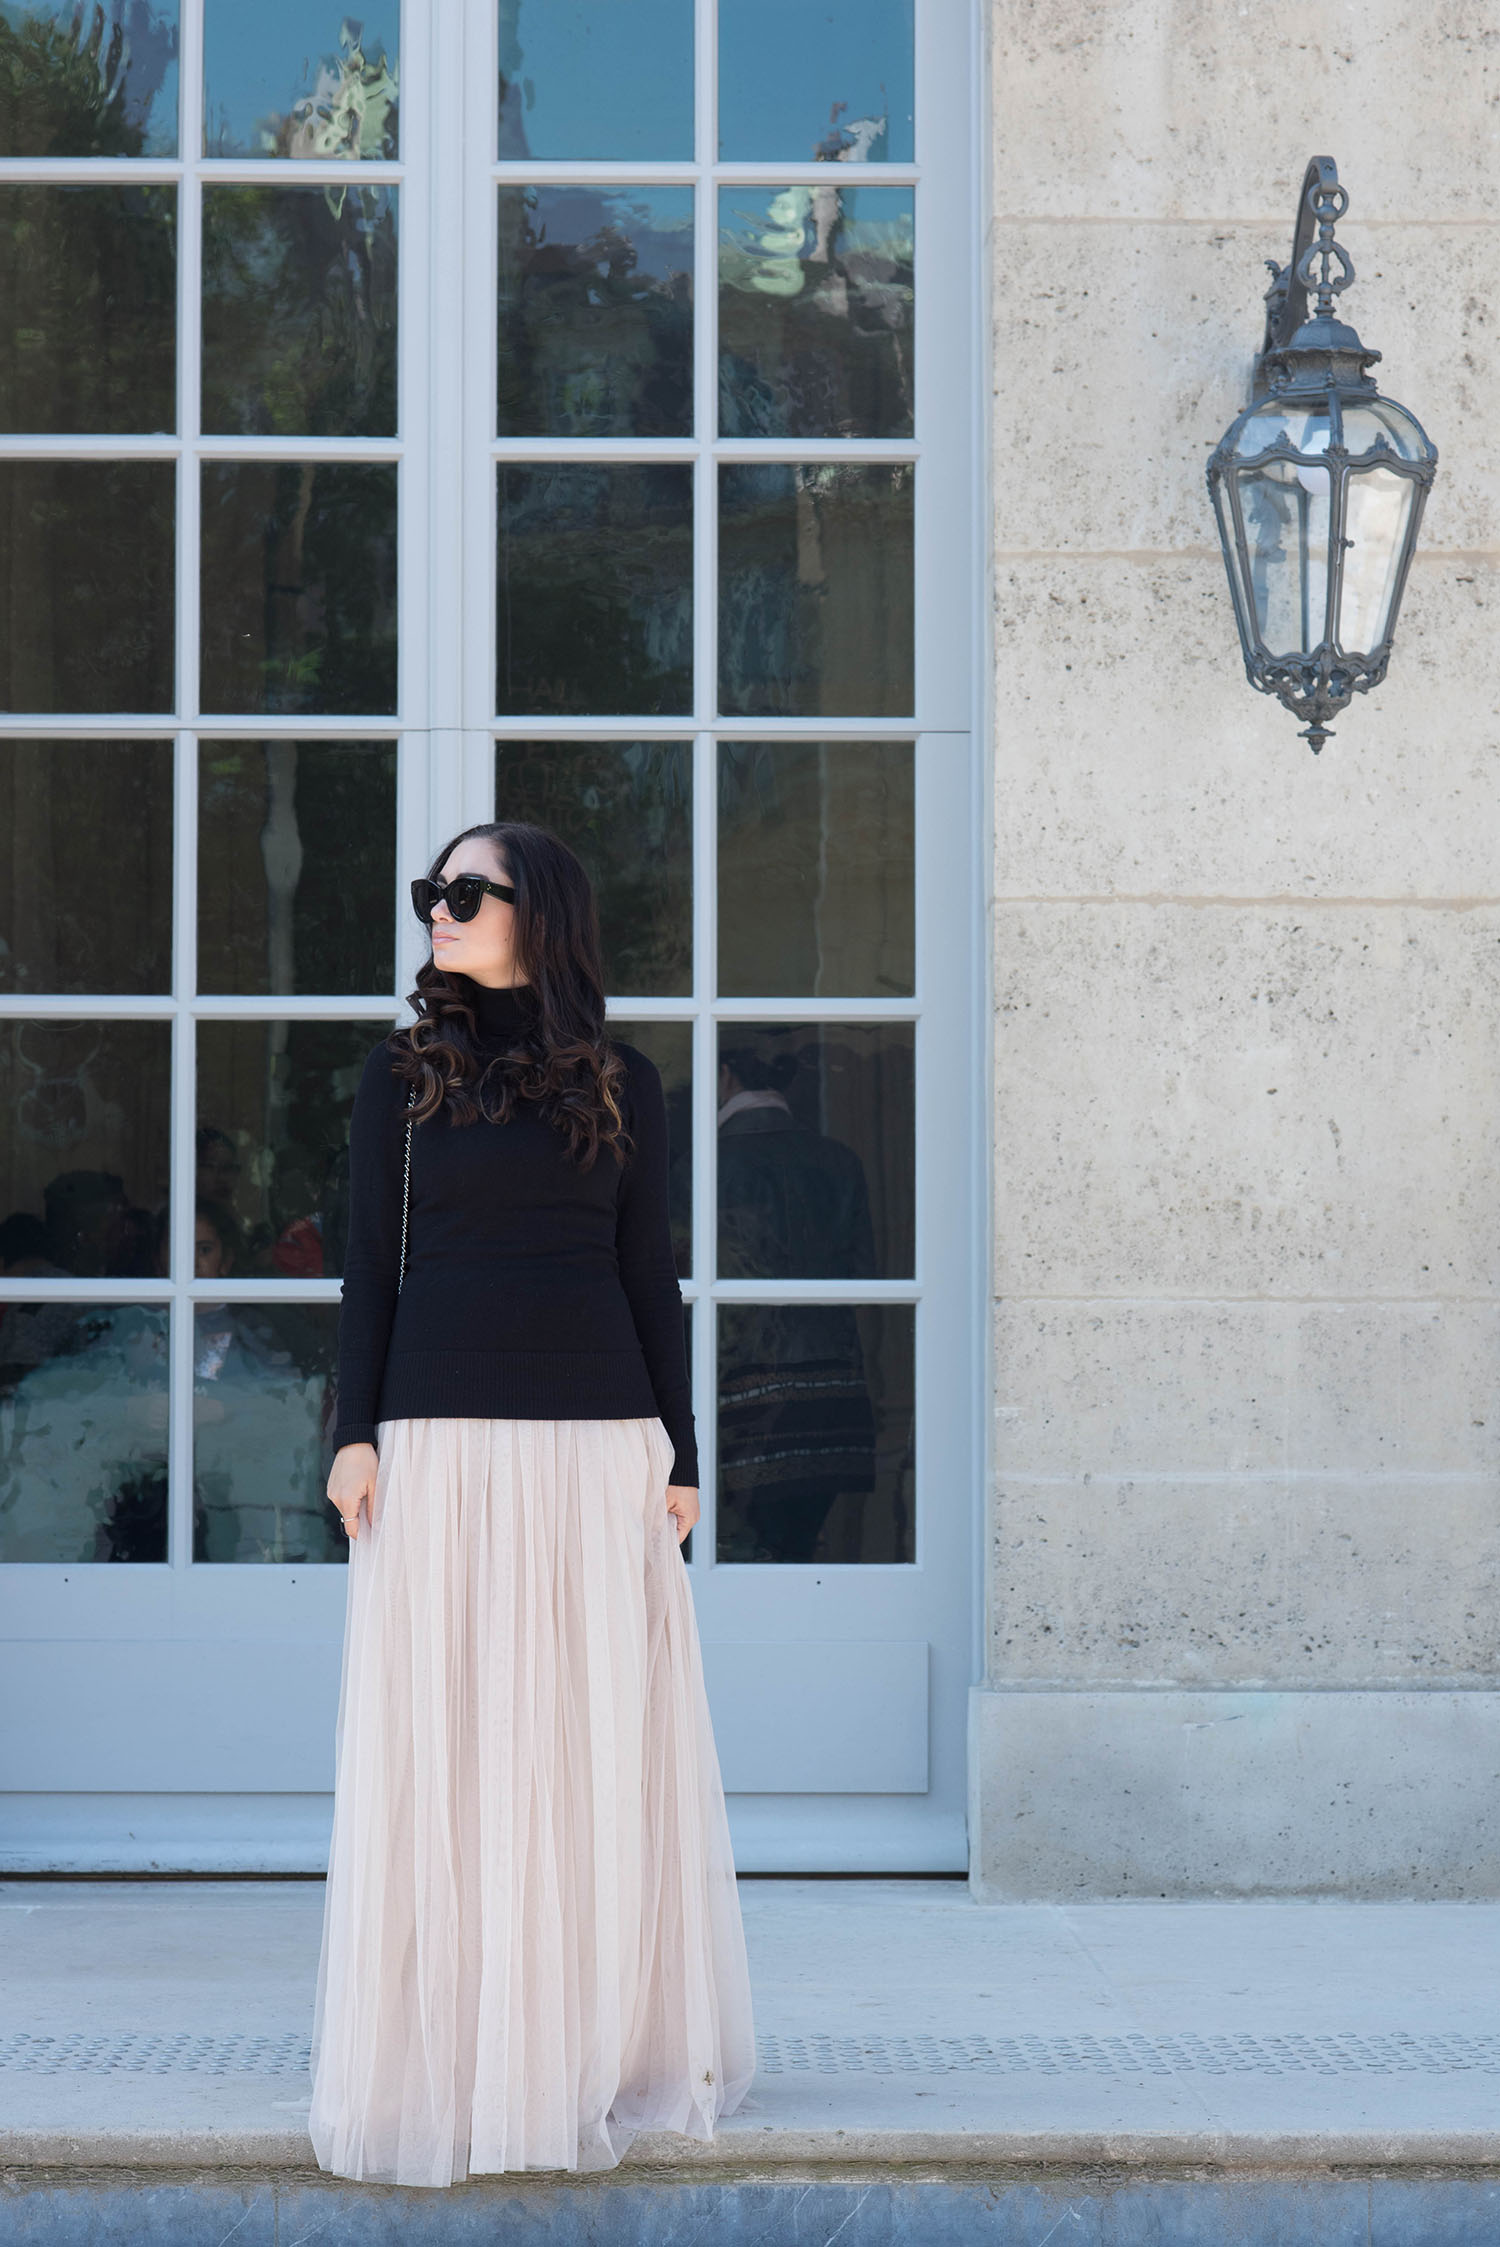 Fashion blogger Cee Fardoe of Coco & Vera stands outside the Musee Rodin in Paris wearing a Needle and Thread dress and Celine Audrey sunglasses